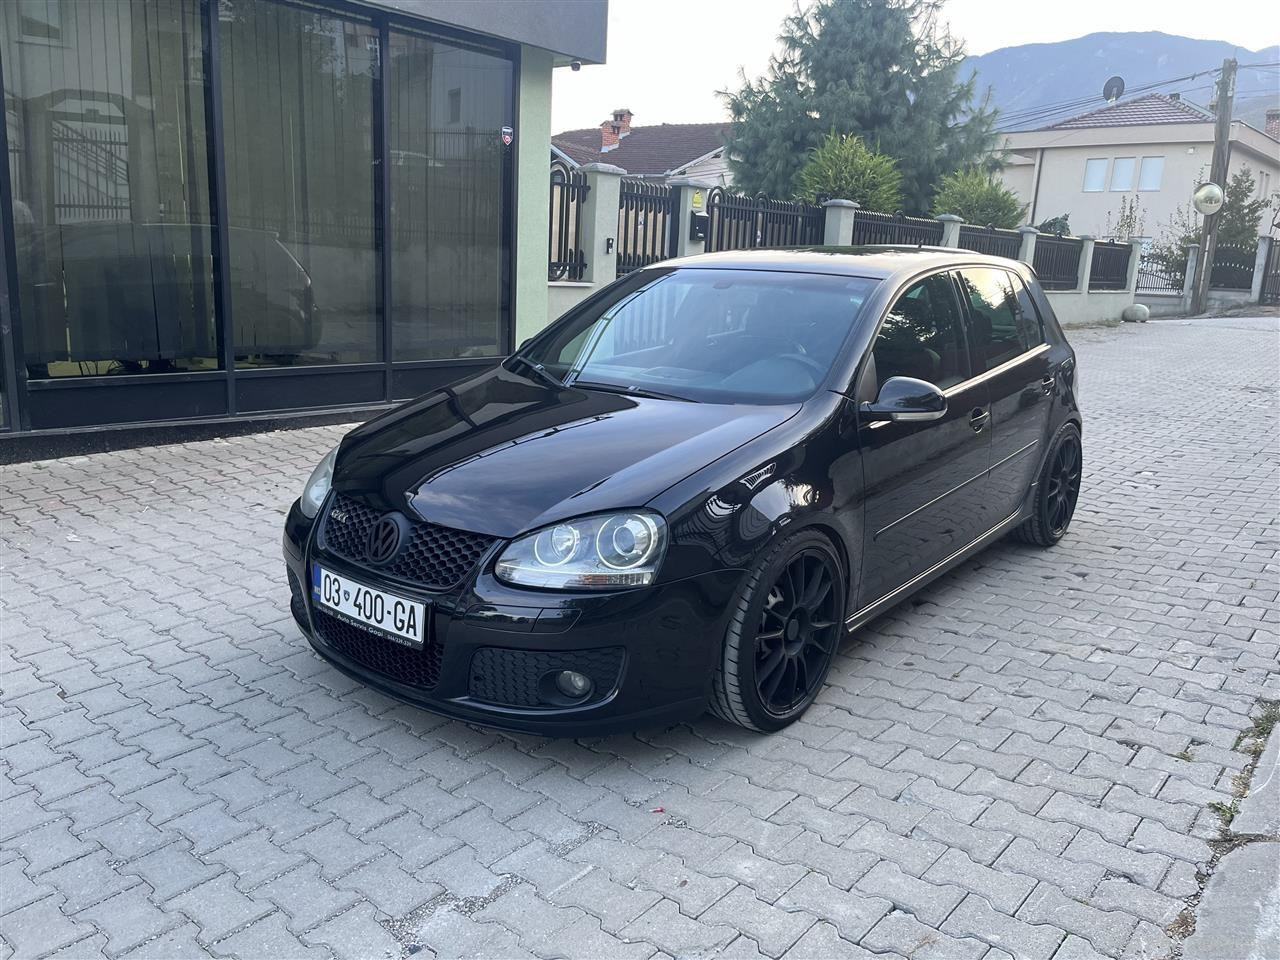 Shes gollf 5 gti 380 pss